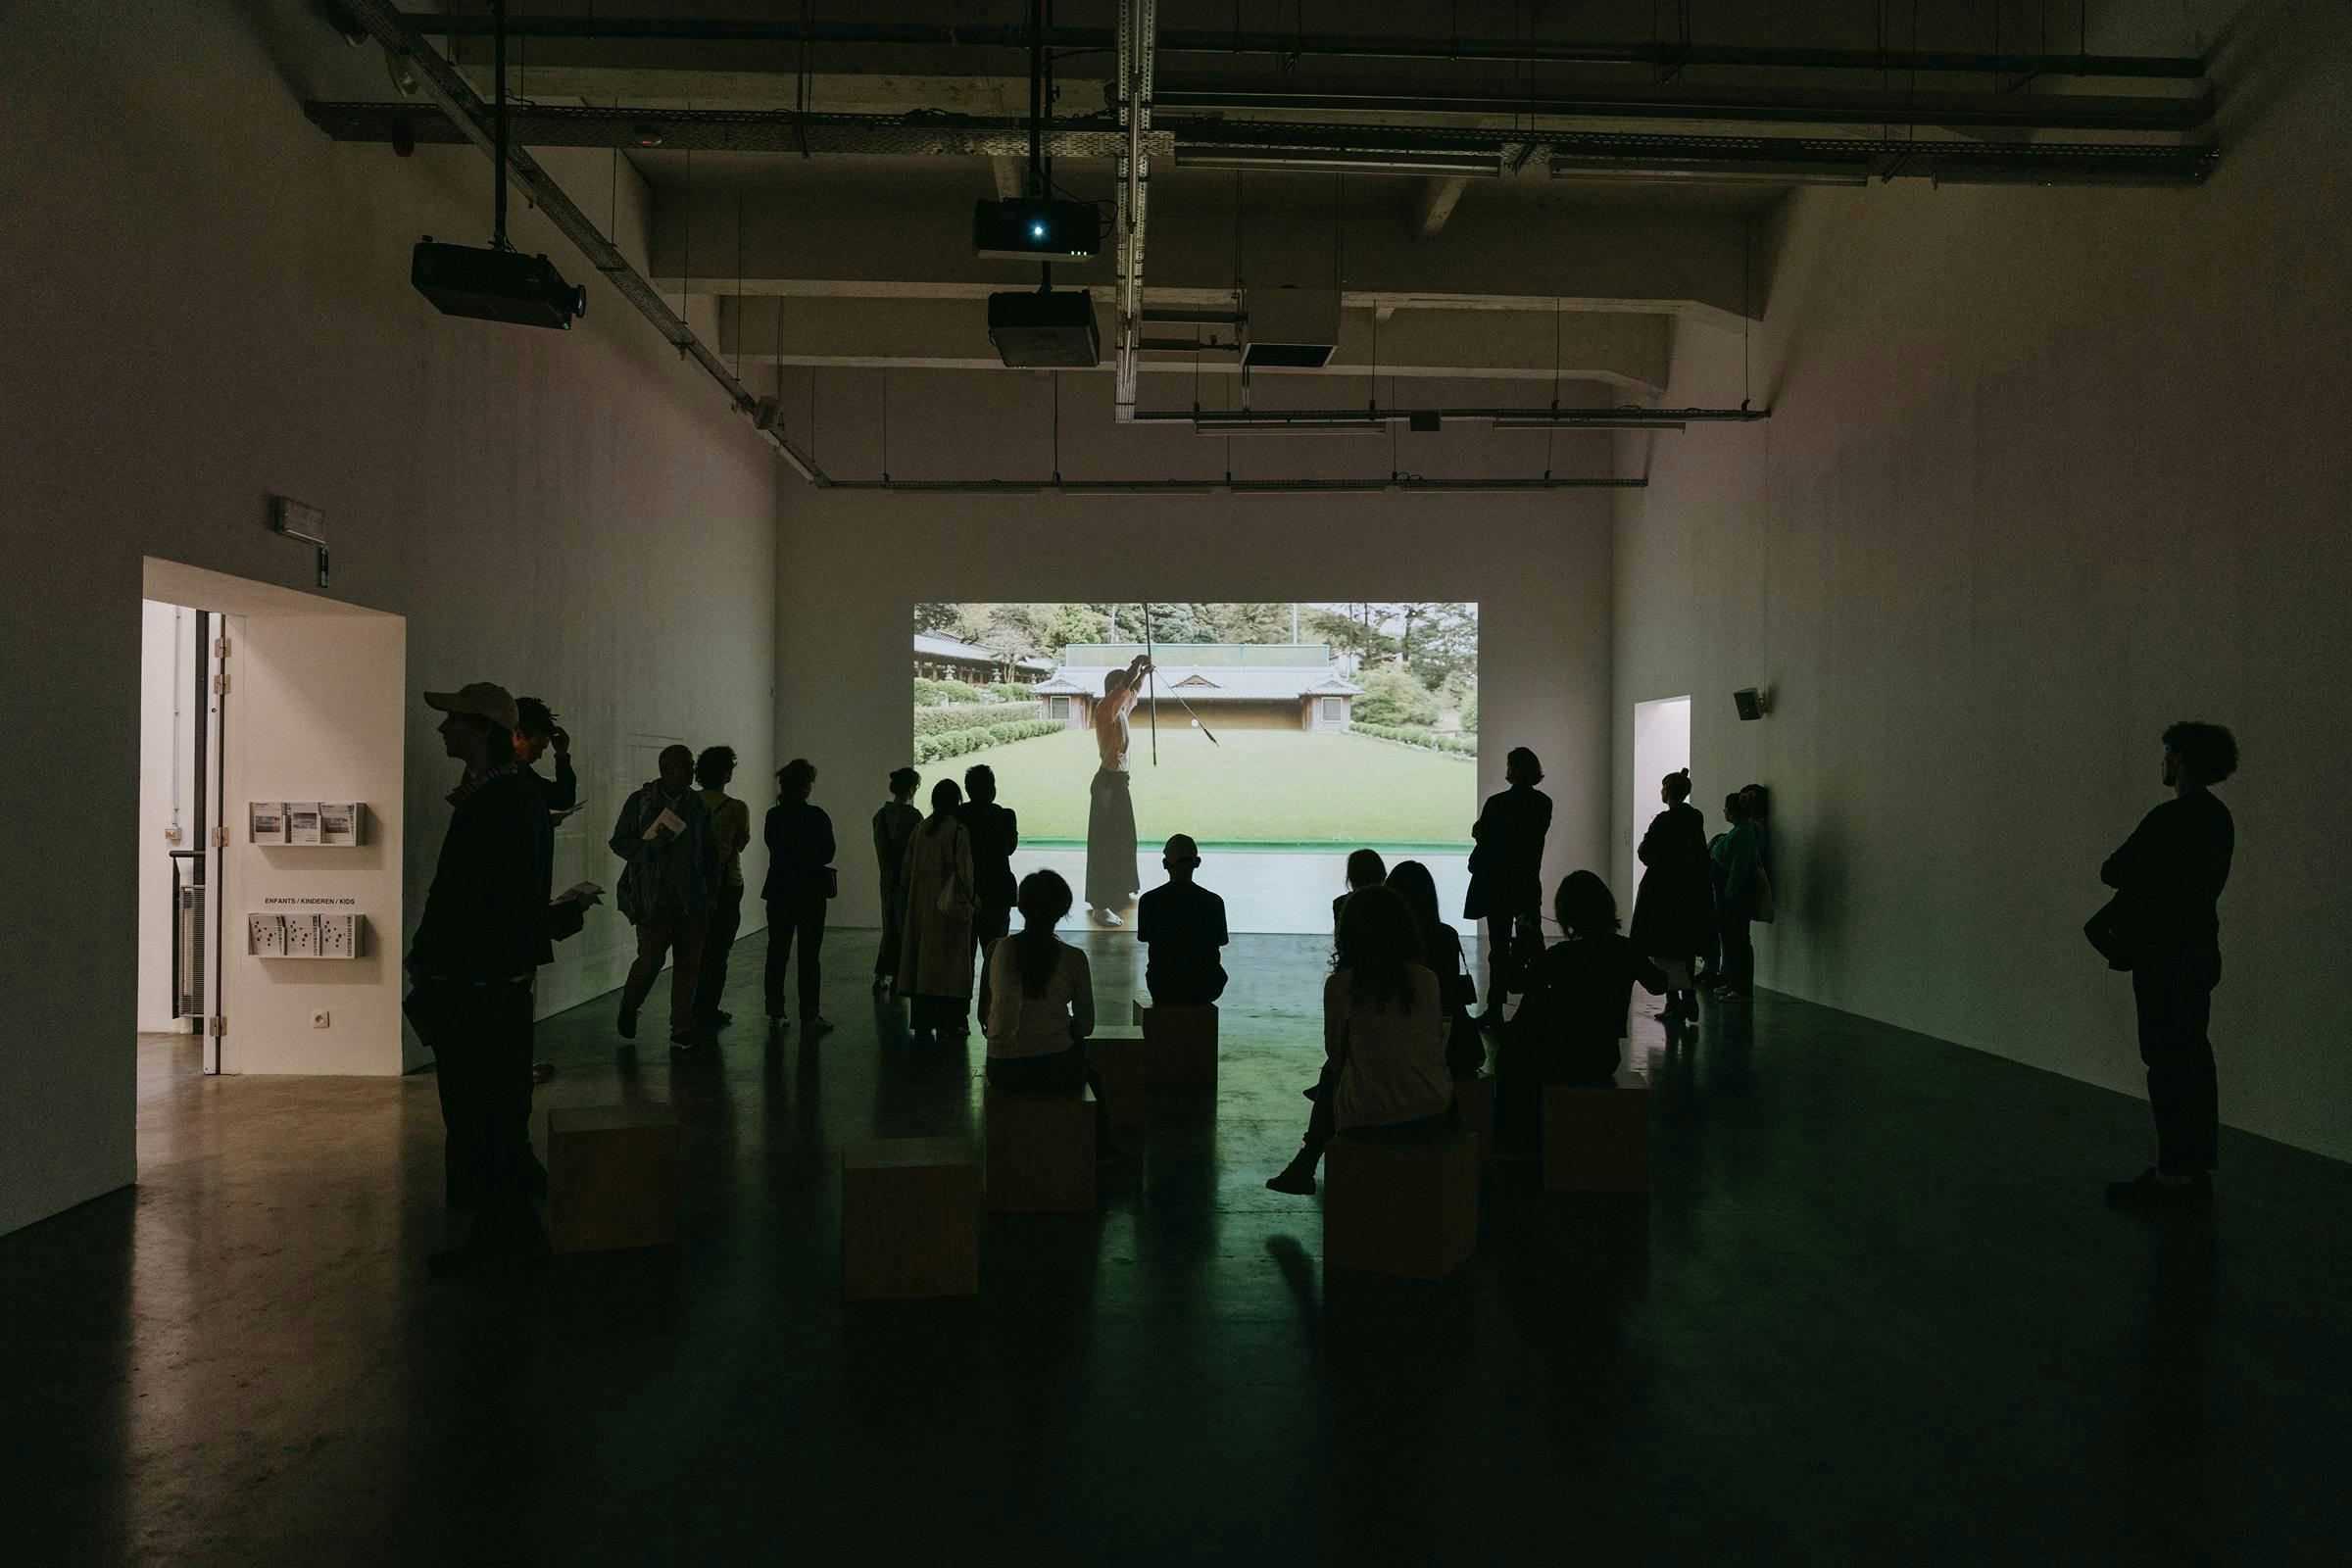 Gallery space with lots of people sat or standing, watching a video projected onto the far wall.